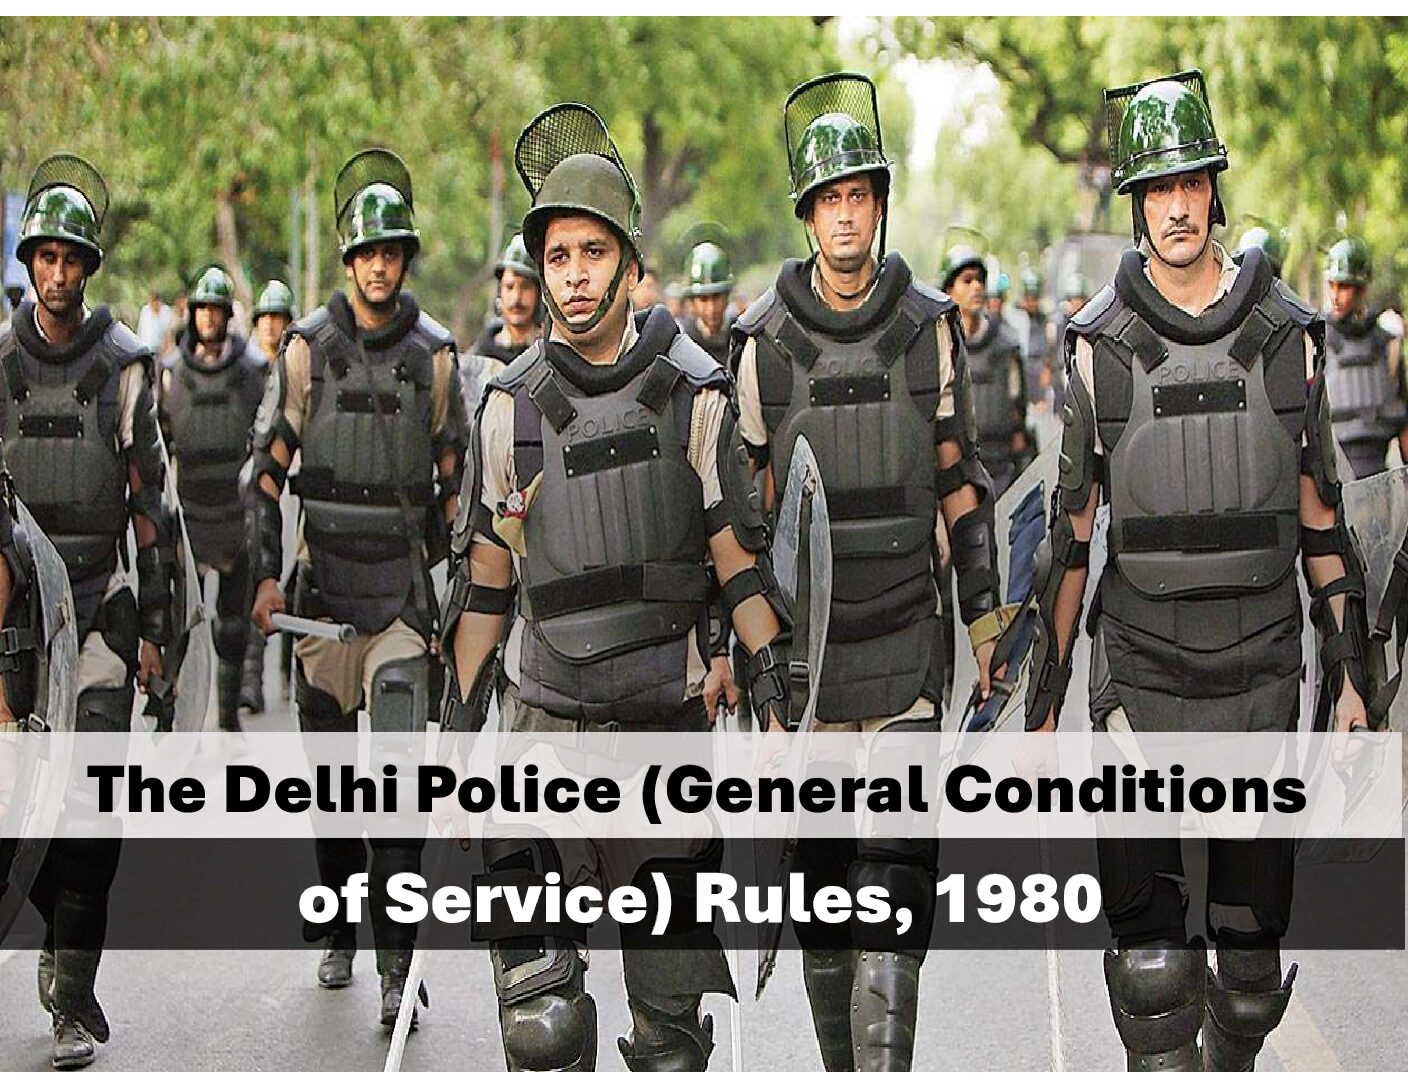 The Delhi Police (General Conditions of Service) Rules, 1980